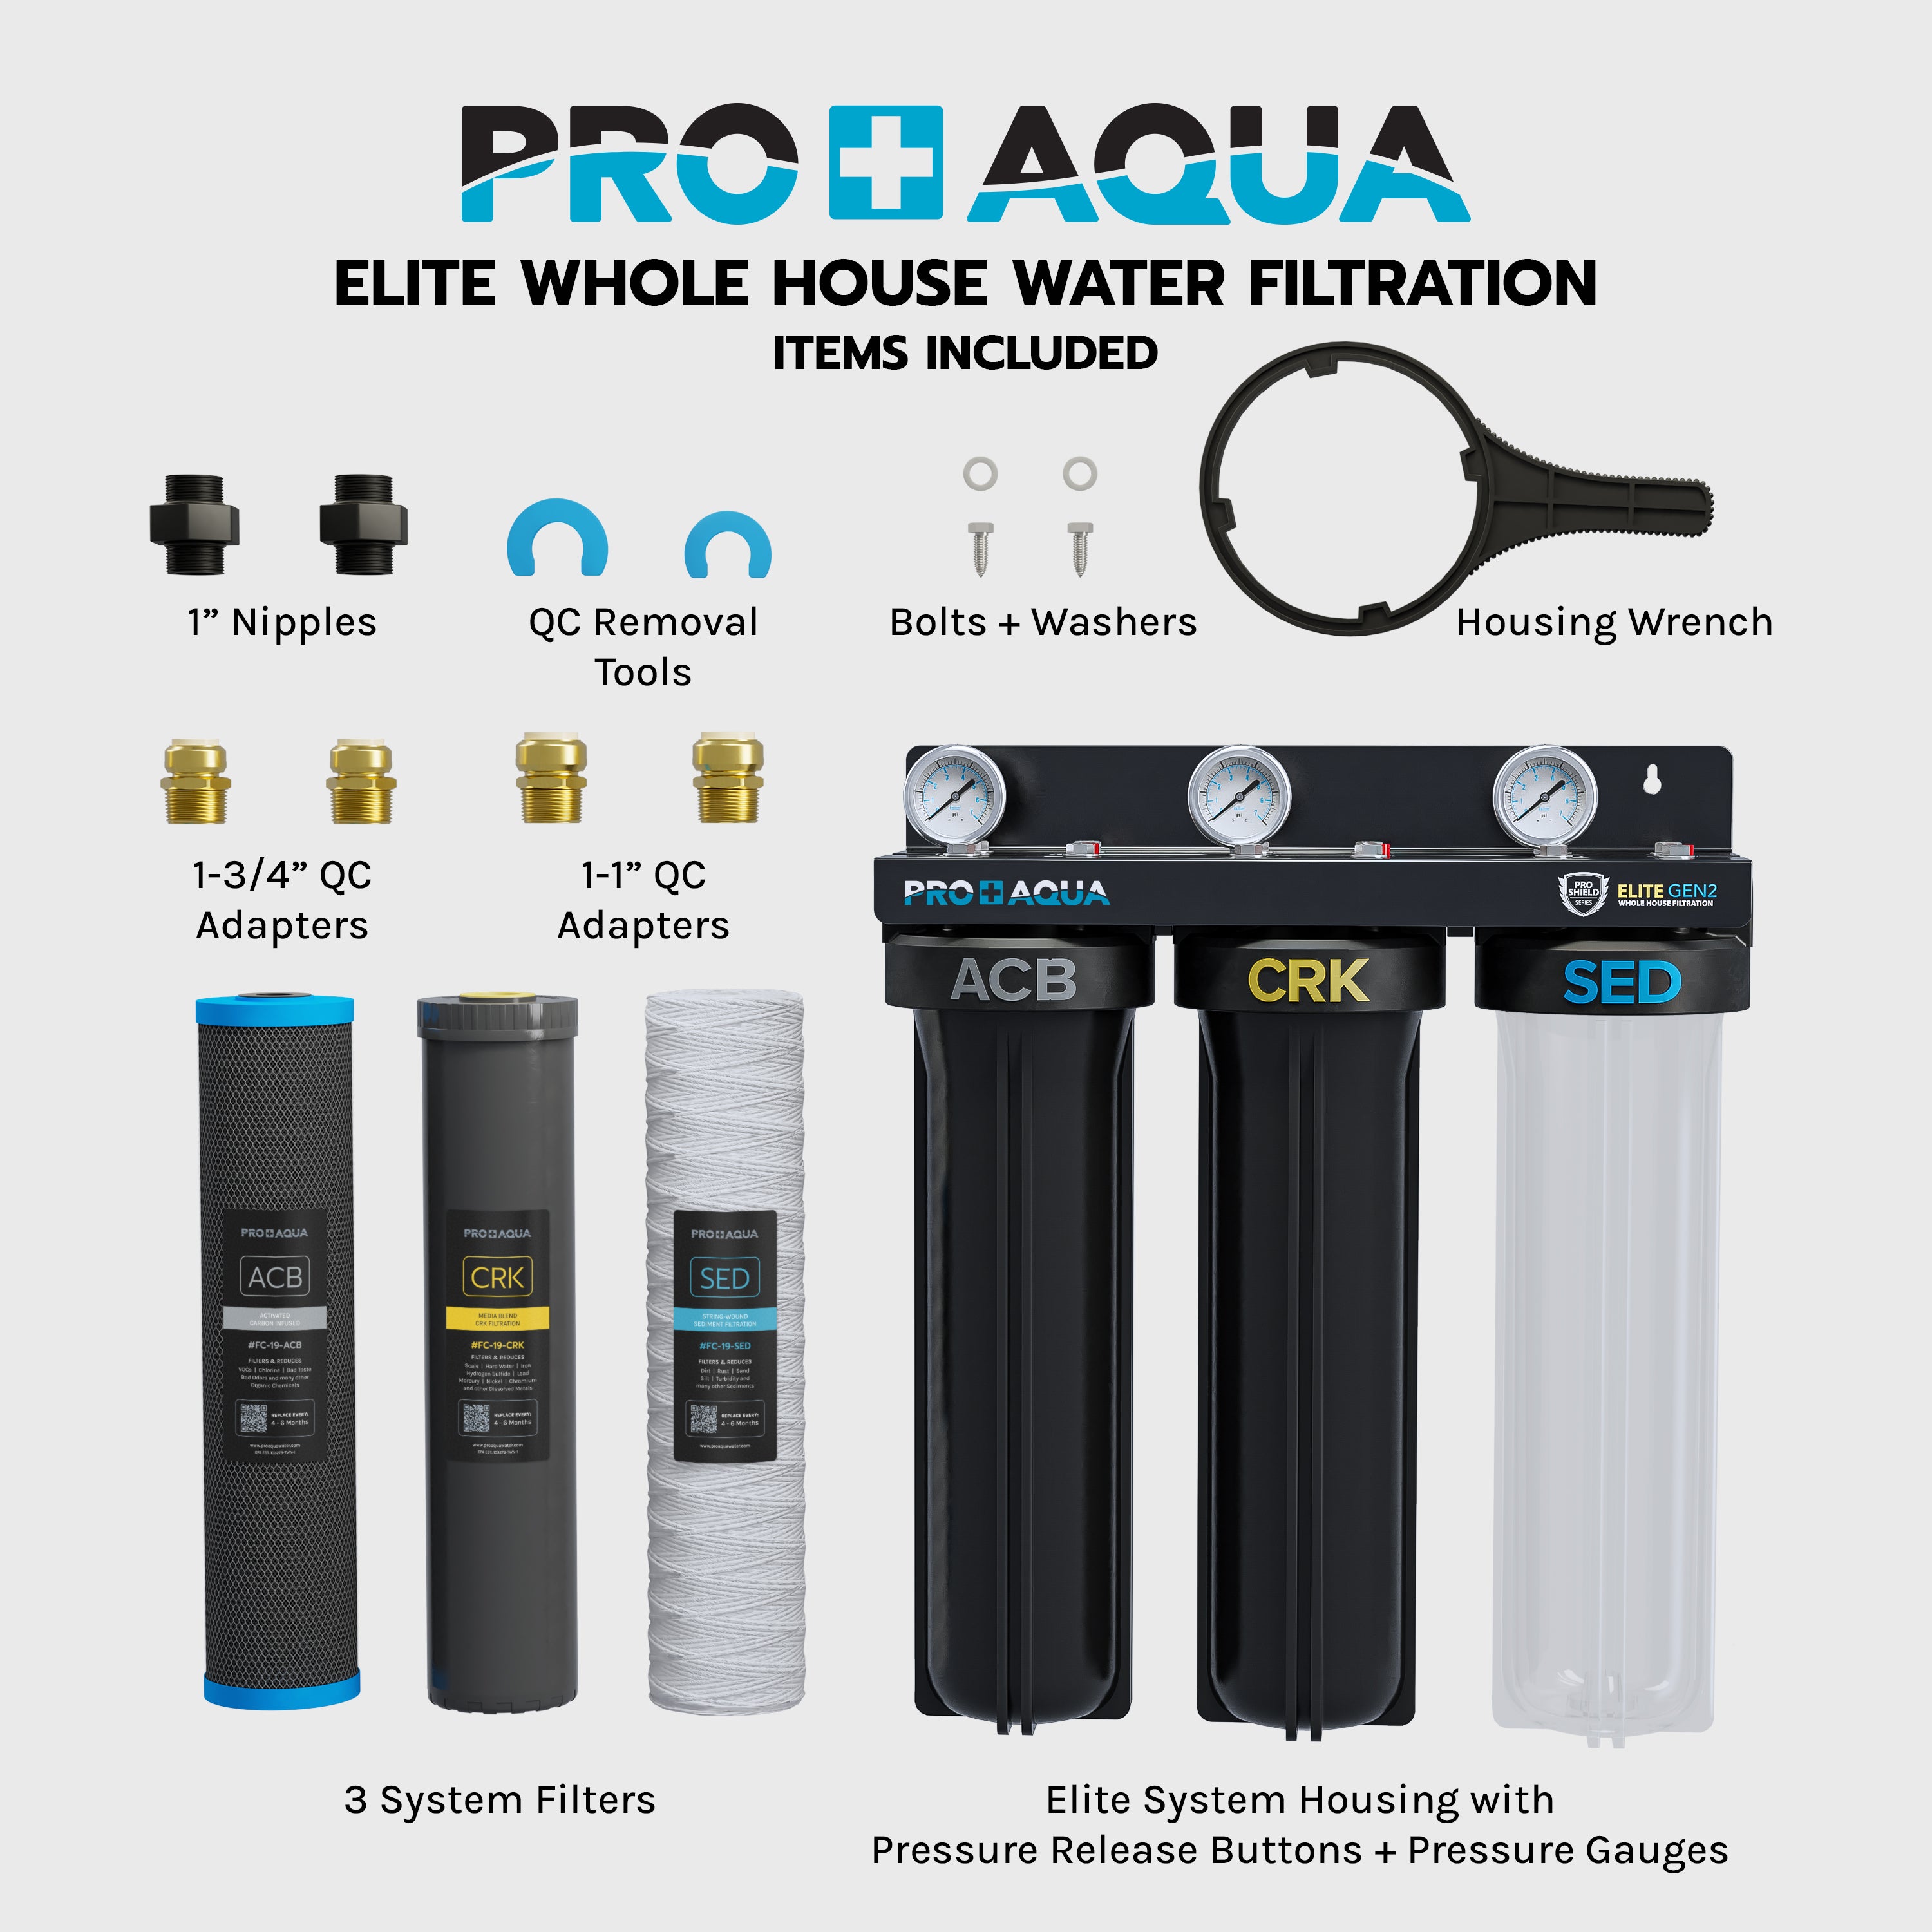 ELITE GEN2 | 3-Stage Whole House Well Water Filter System